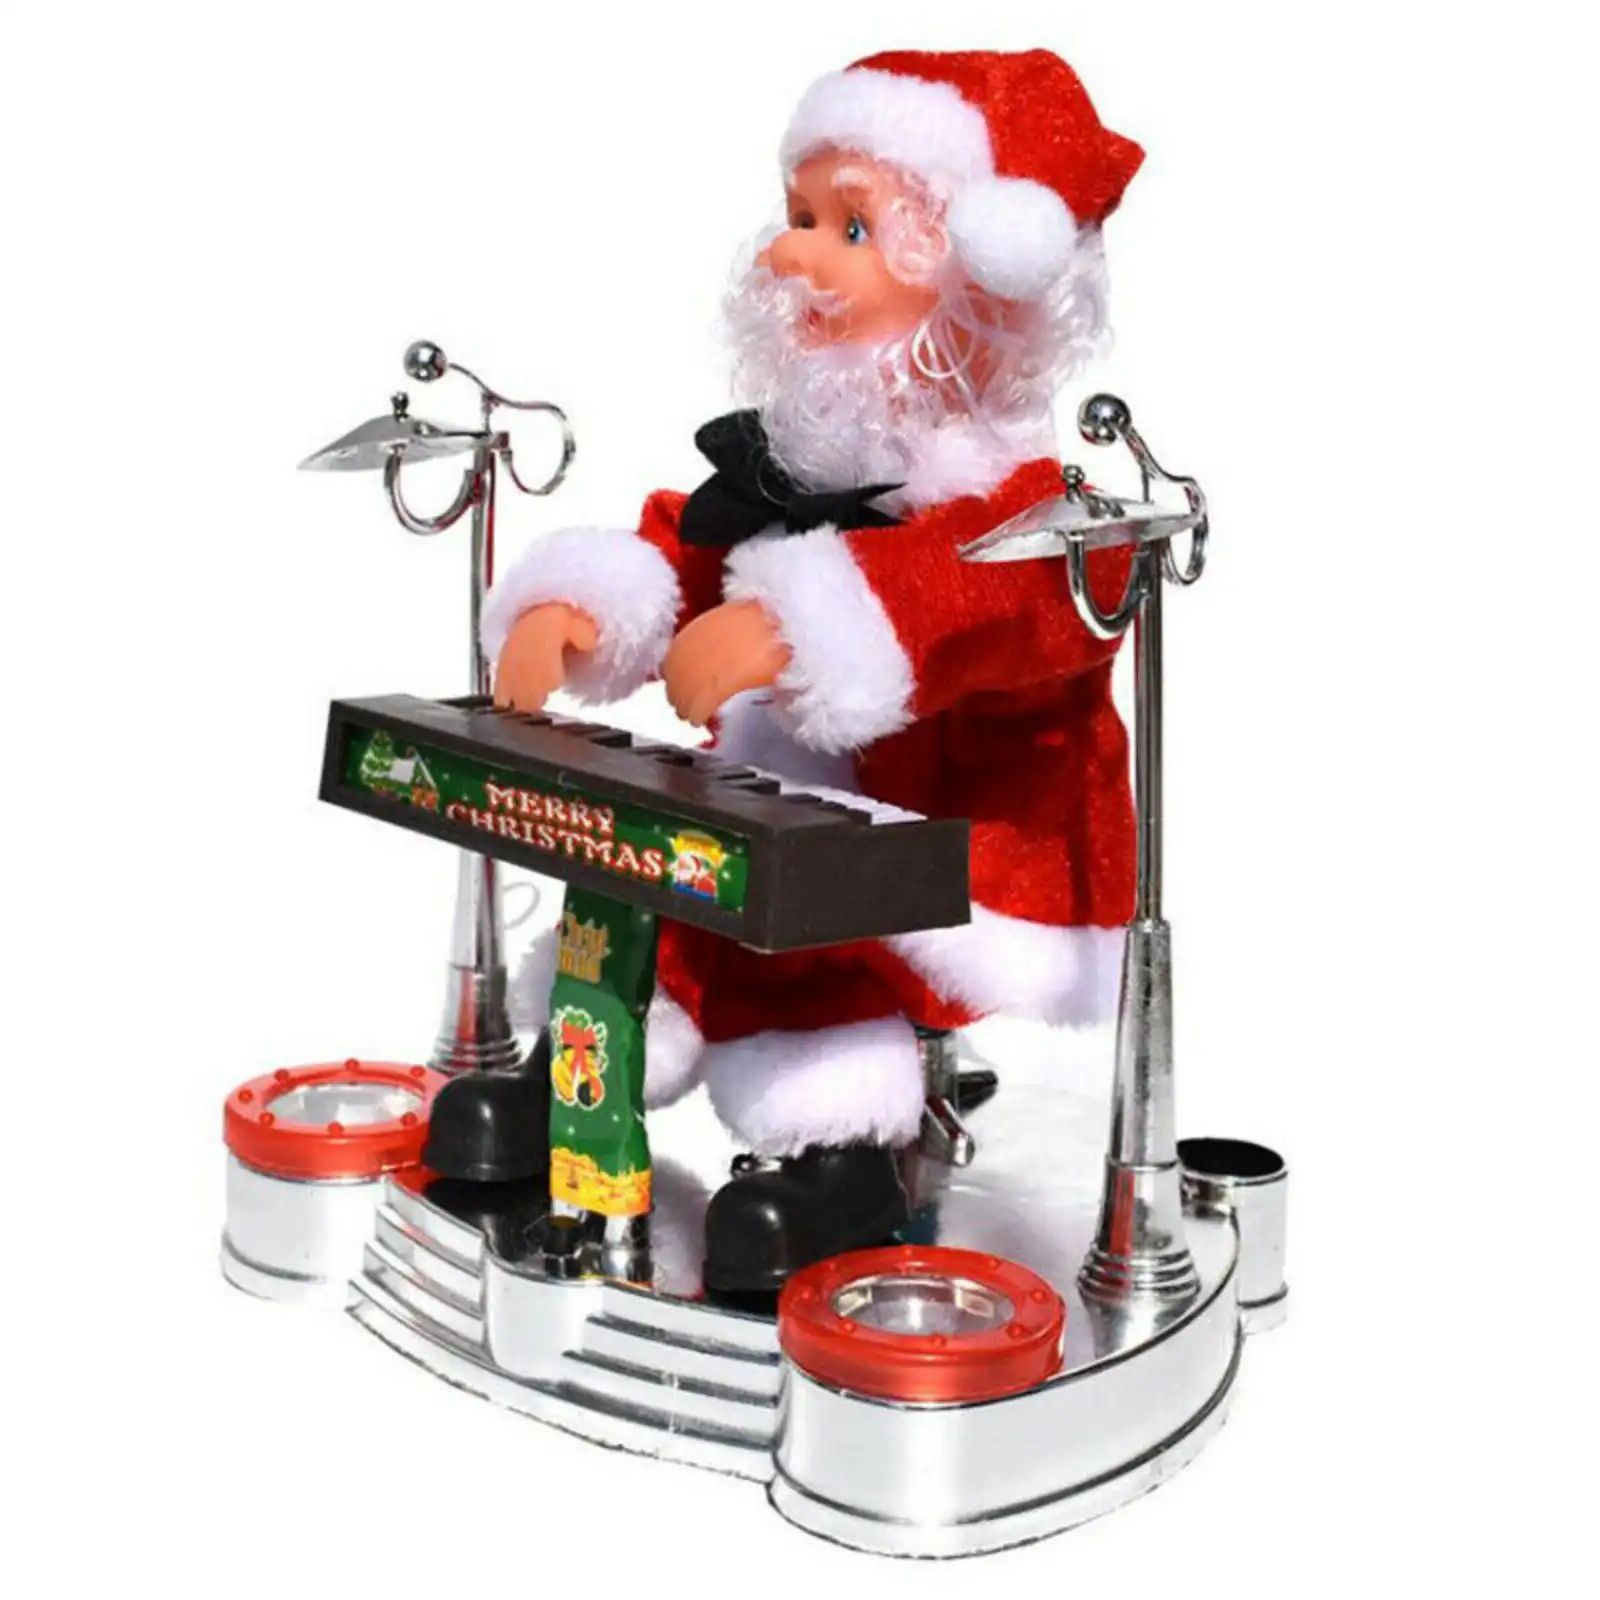 Santa Claus Playing Ornament Piano Doll Musical Electric Toy Xmas Christmas Gift